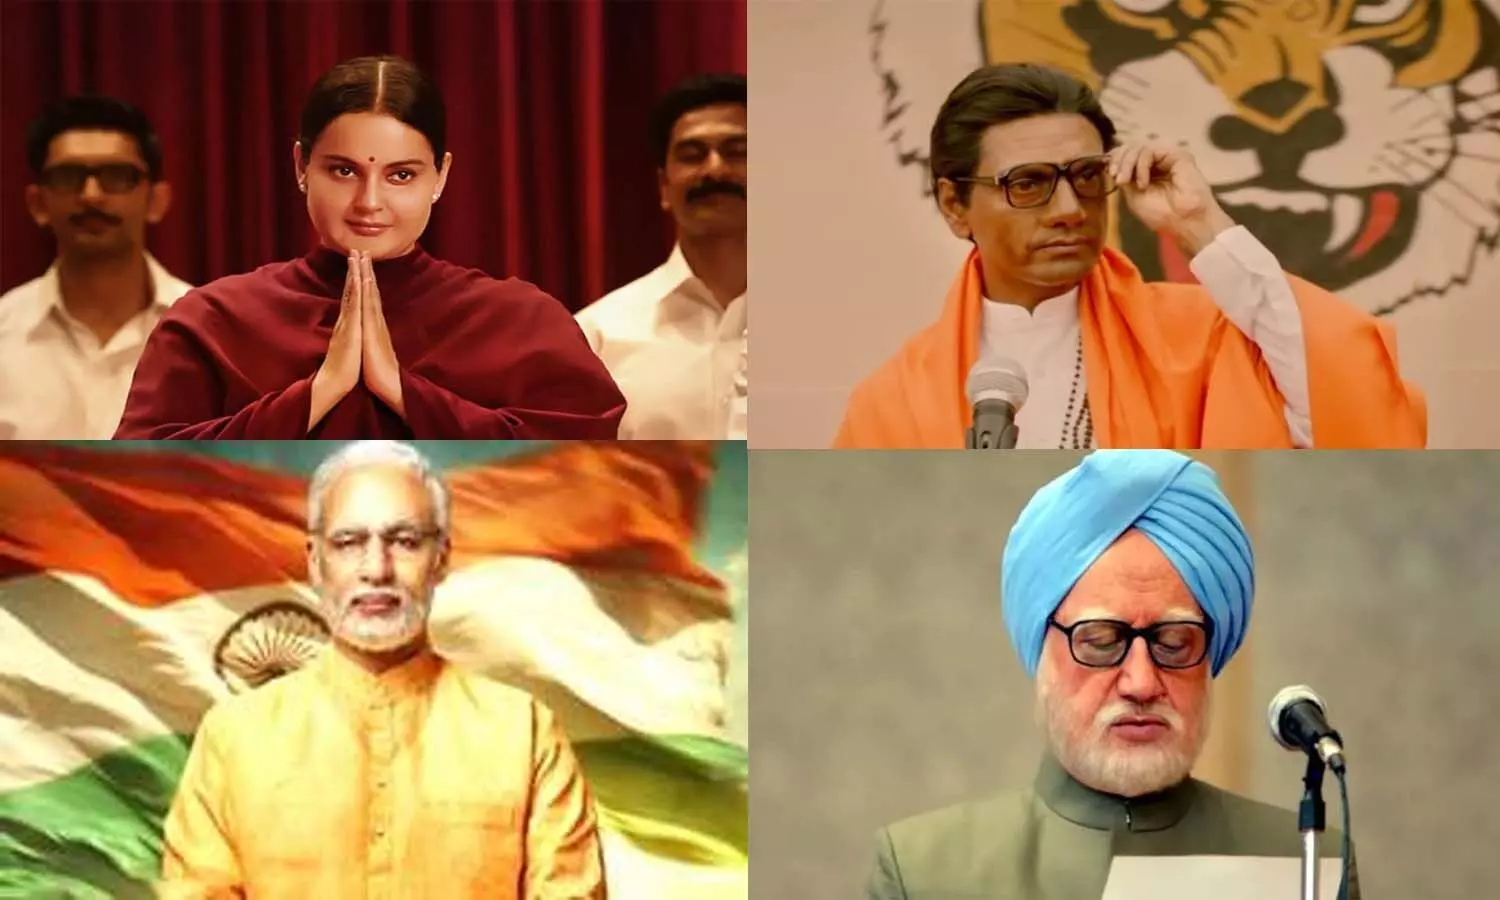 Movies On Politicians: Bollywood celebrities who played political leaders in films, including Nawazuddin Siddiqui and Kangana